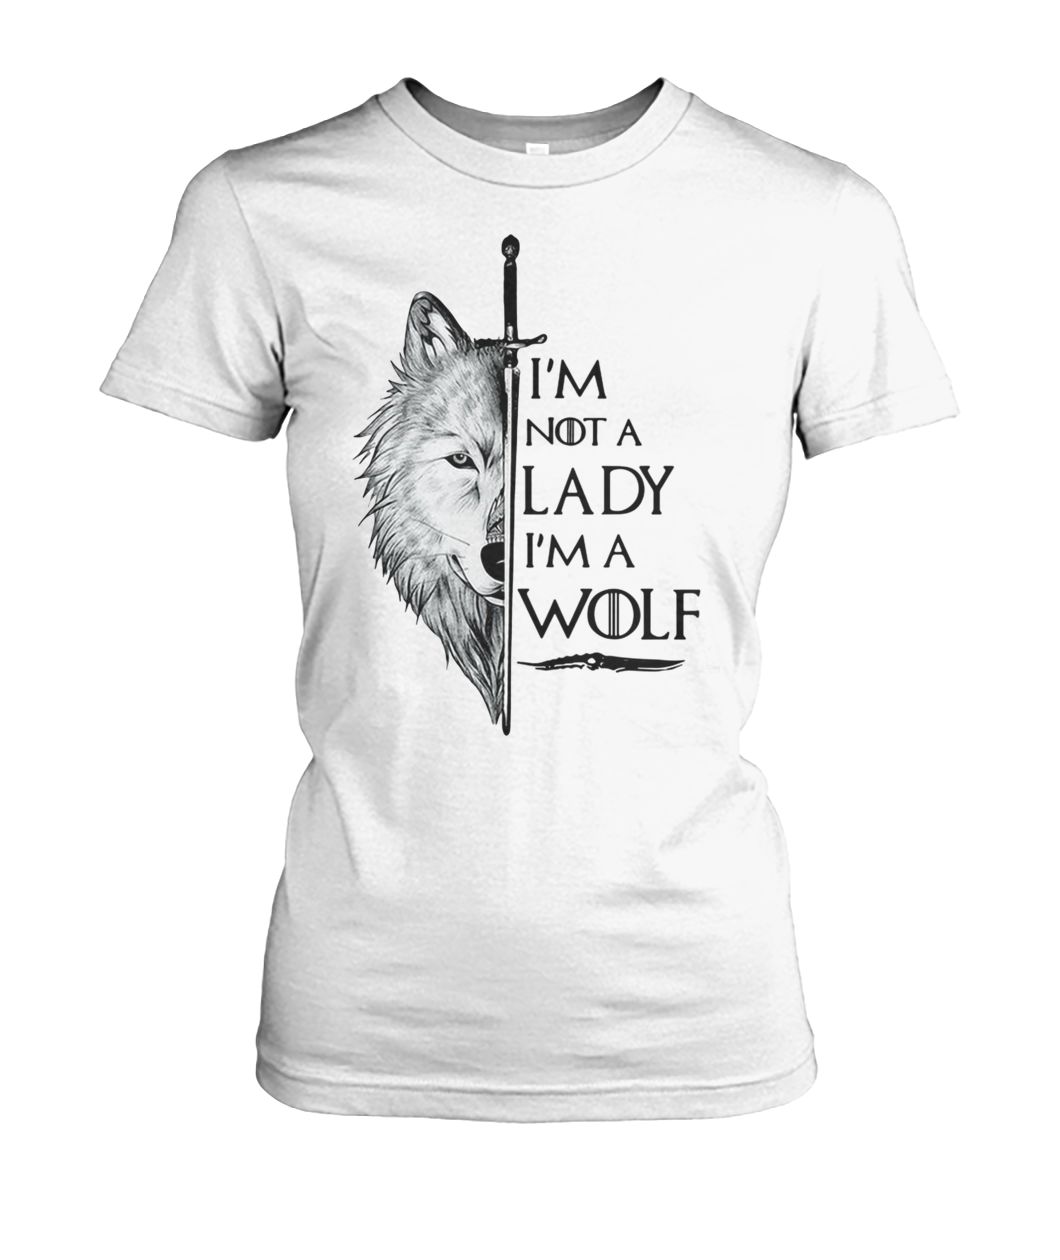 I'm not a lady I'm a wolf game of thrones women's crew tee